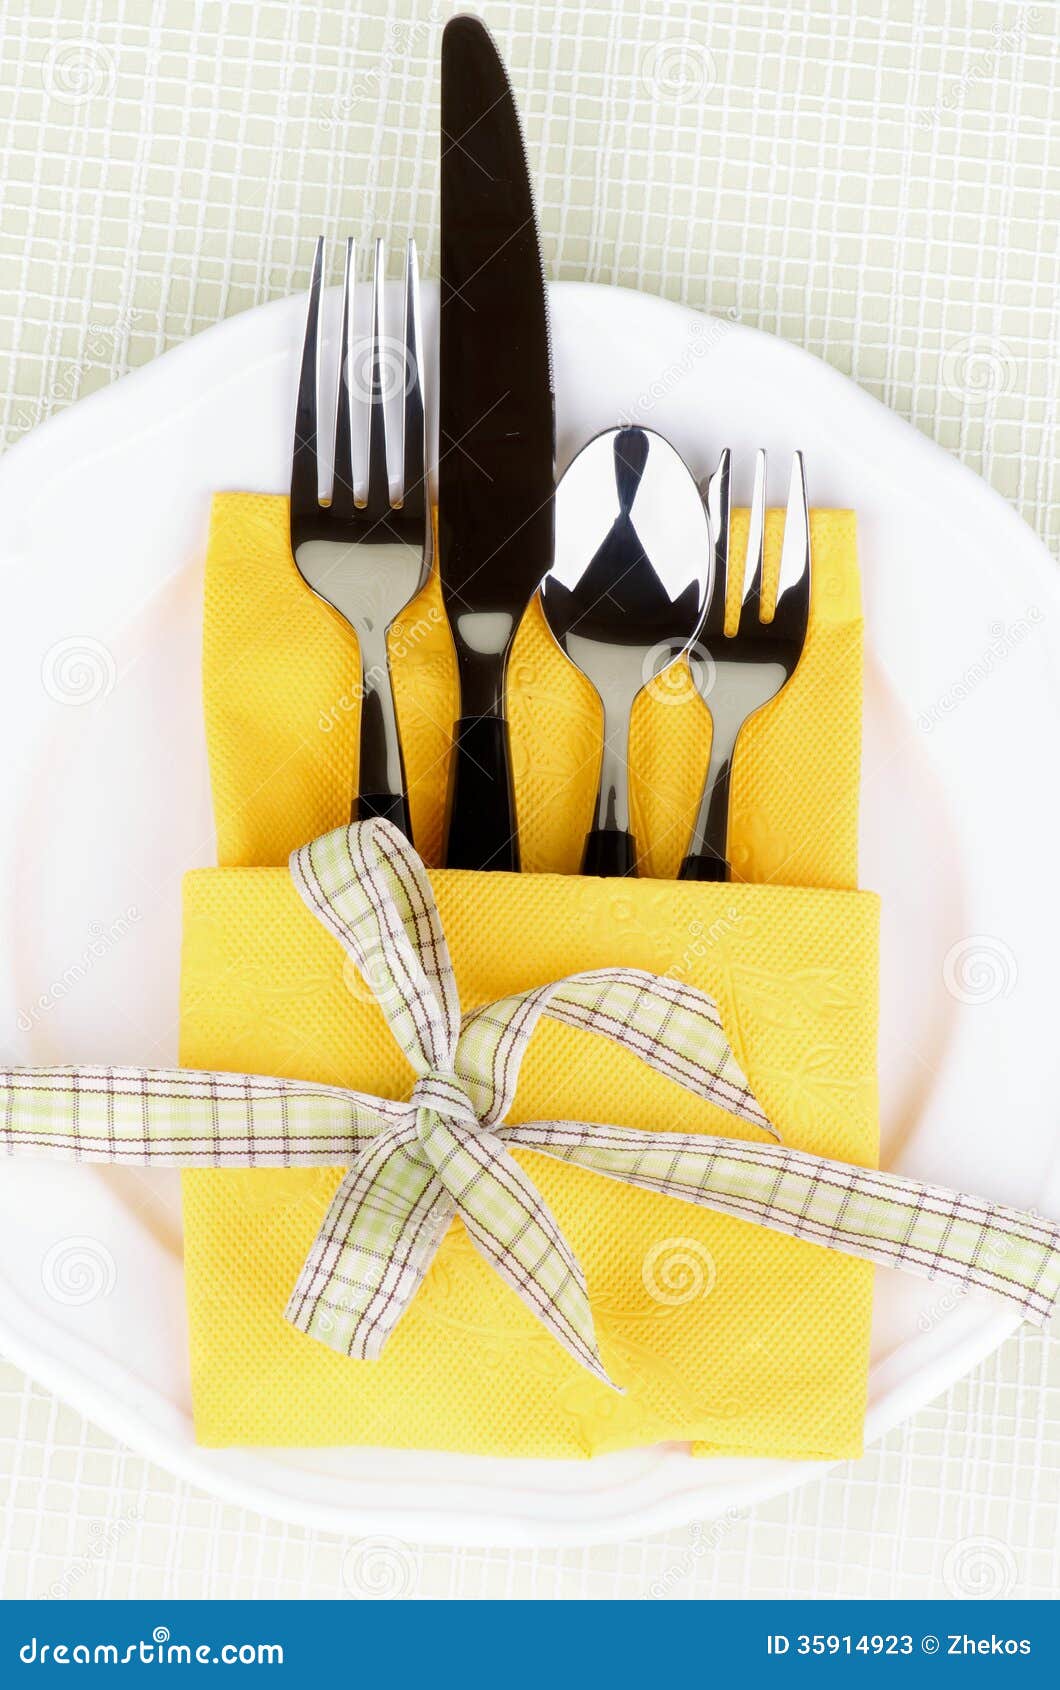 Elegant Table Setting with Fork, Table Knife, Spoon and Dessert Fork 